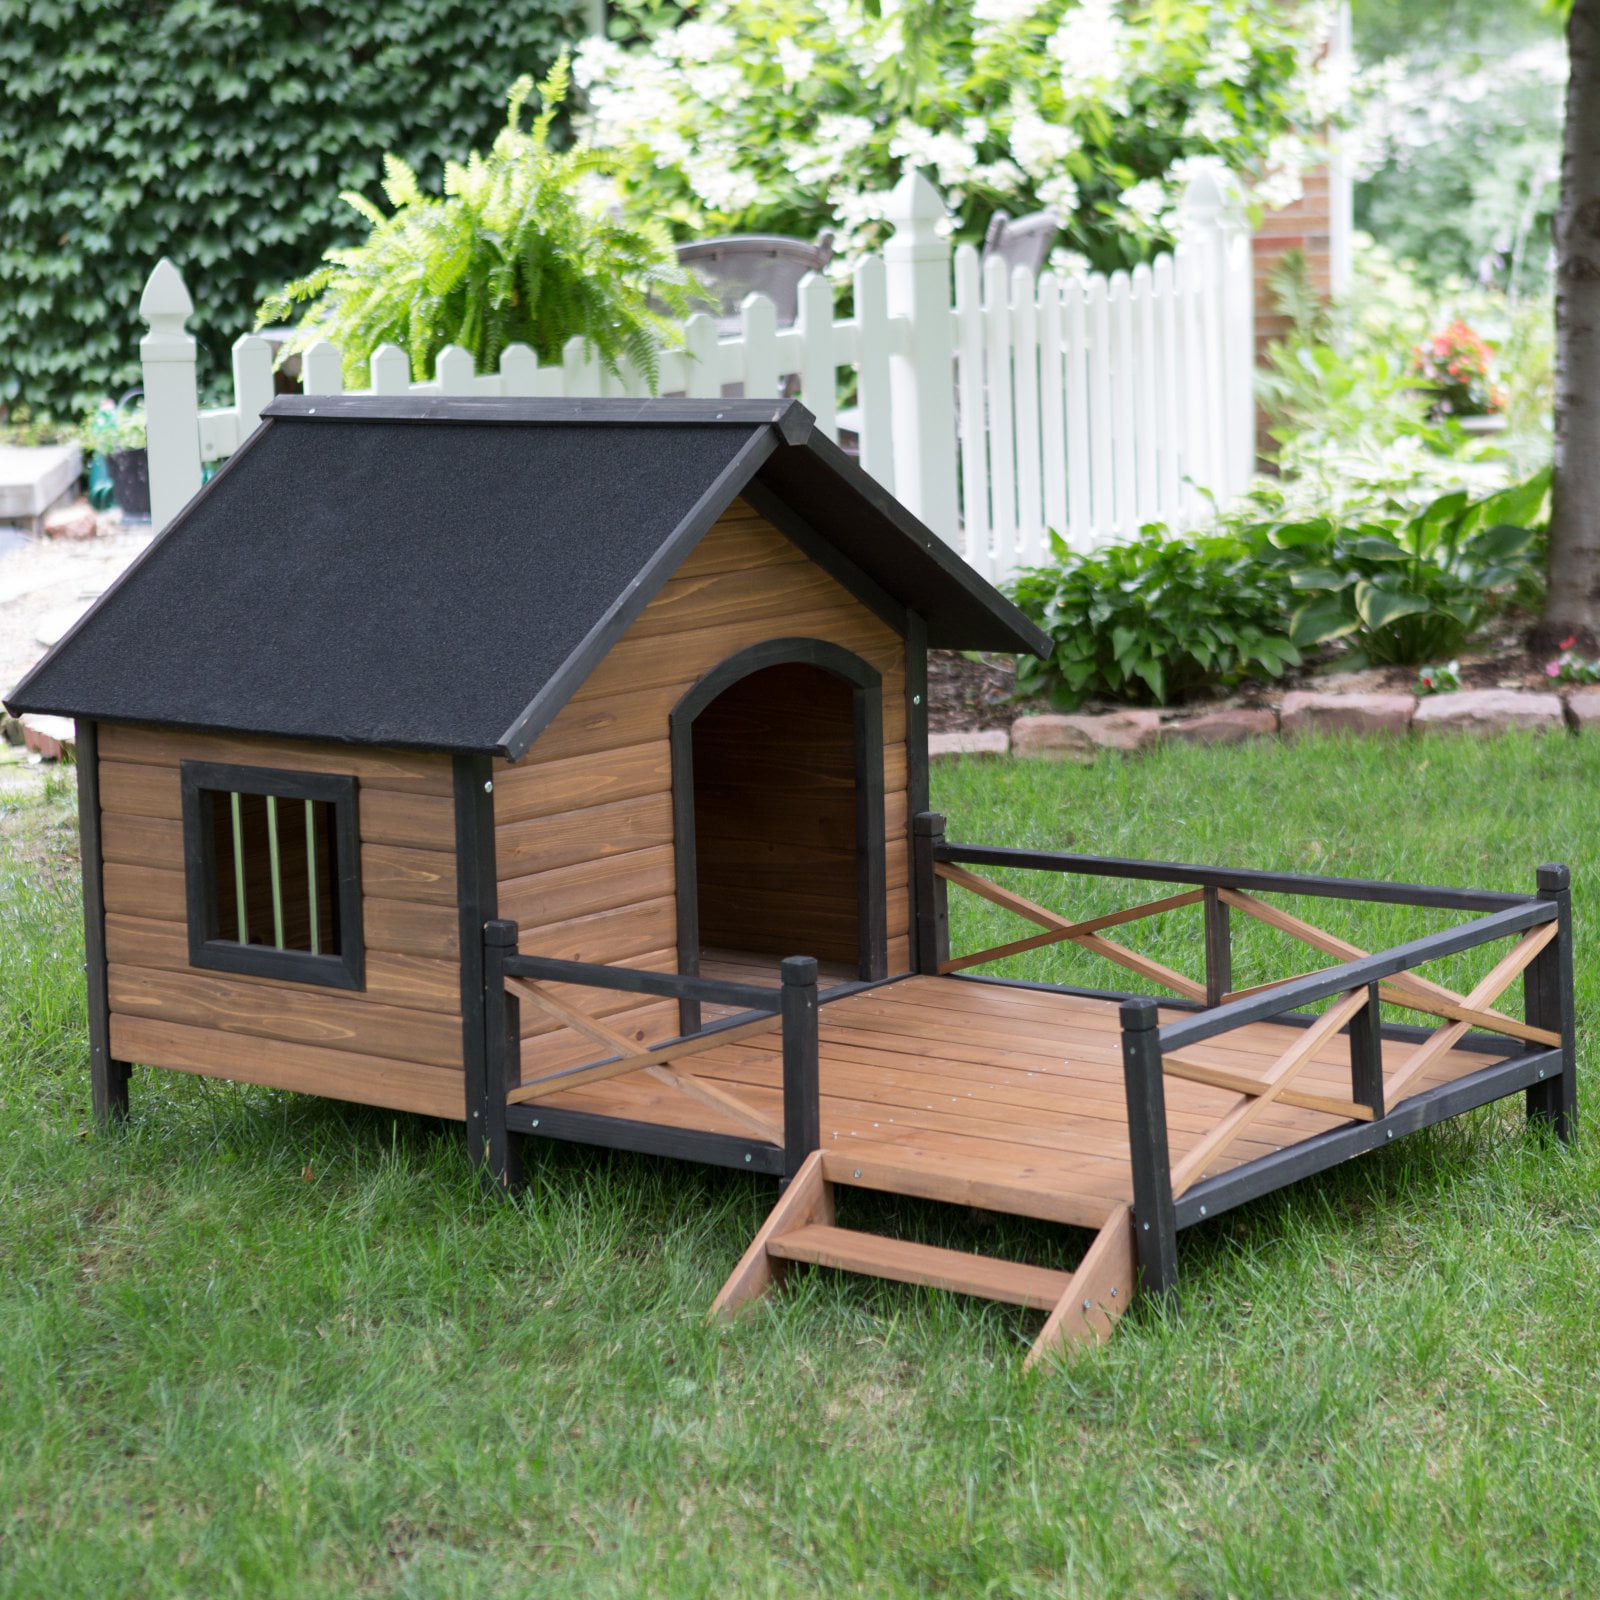 dog house rate